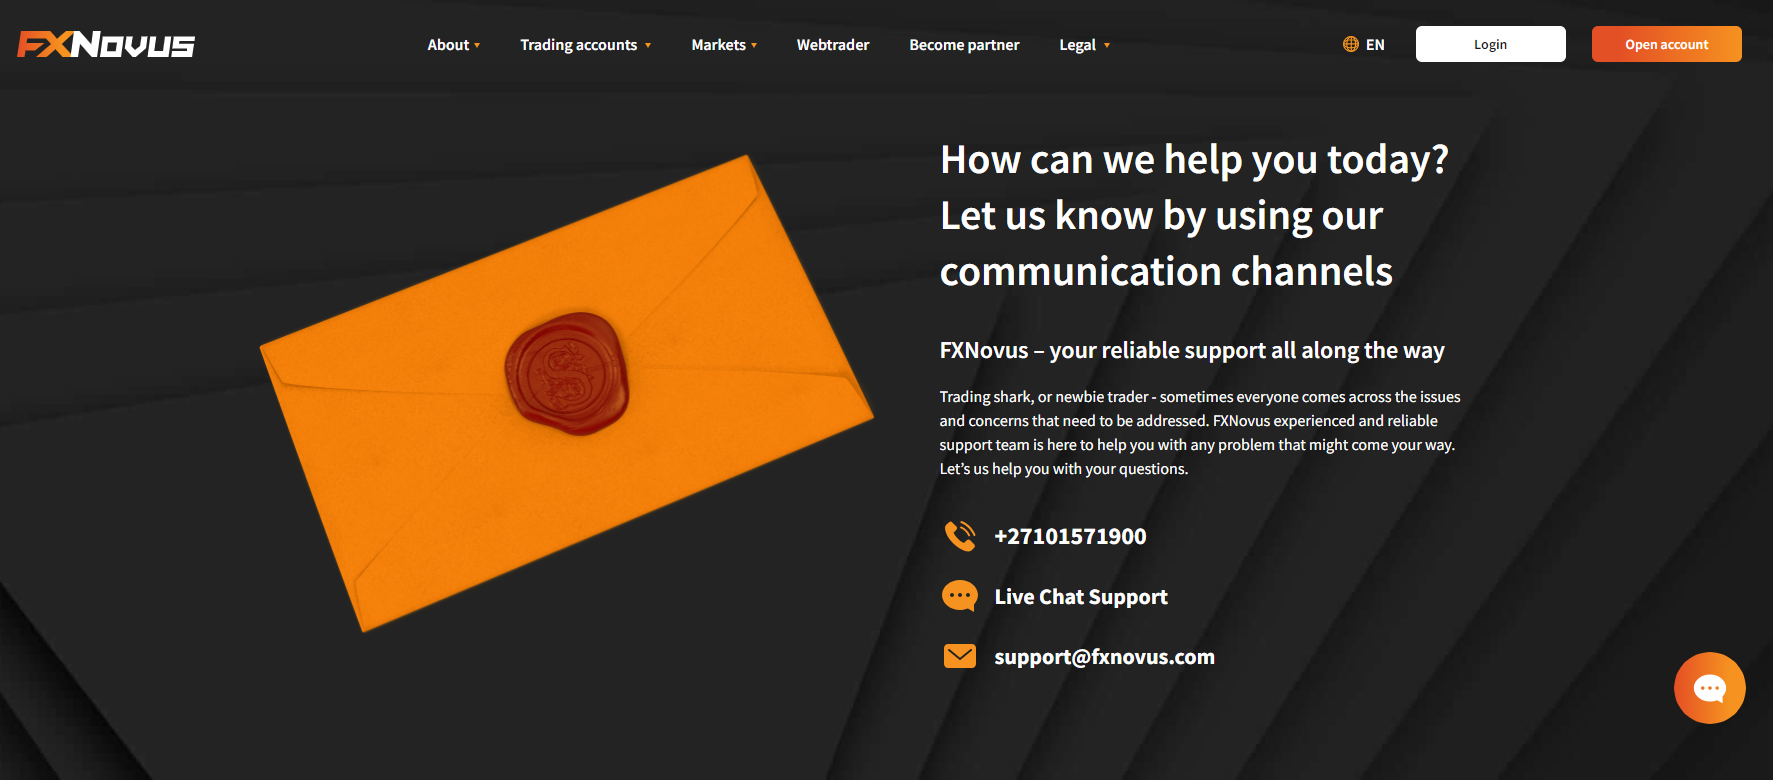 FXNovus contact us page showcasing various methods of reaching out